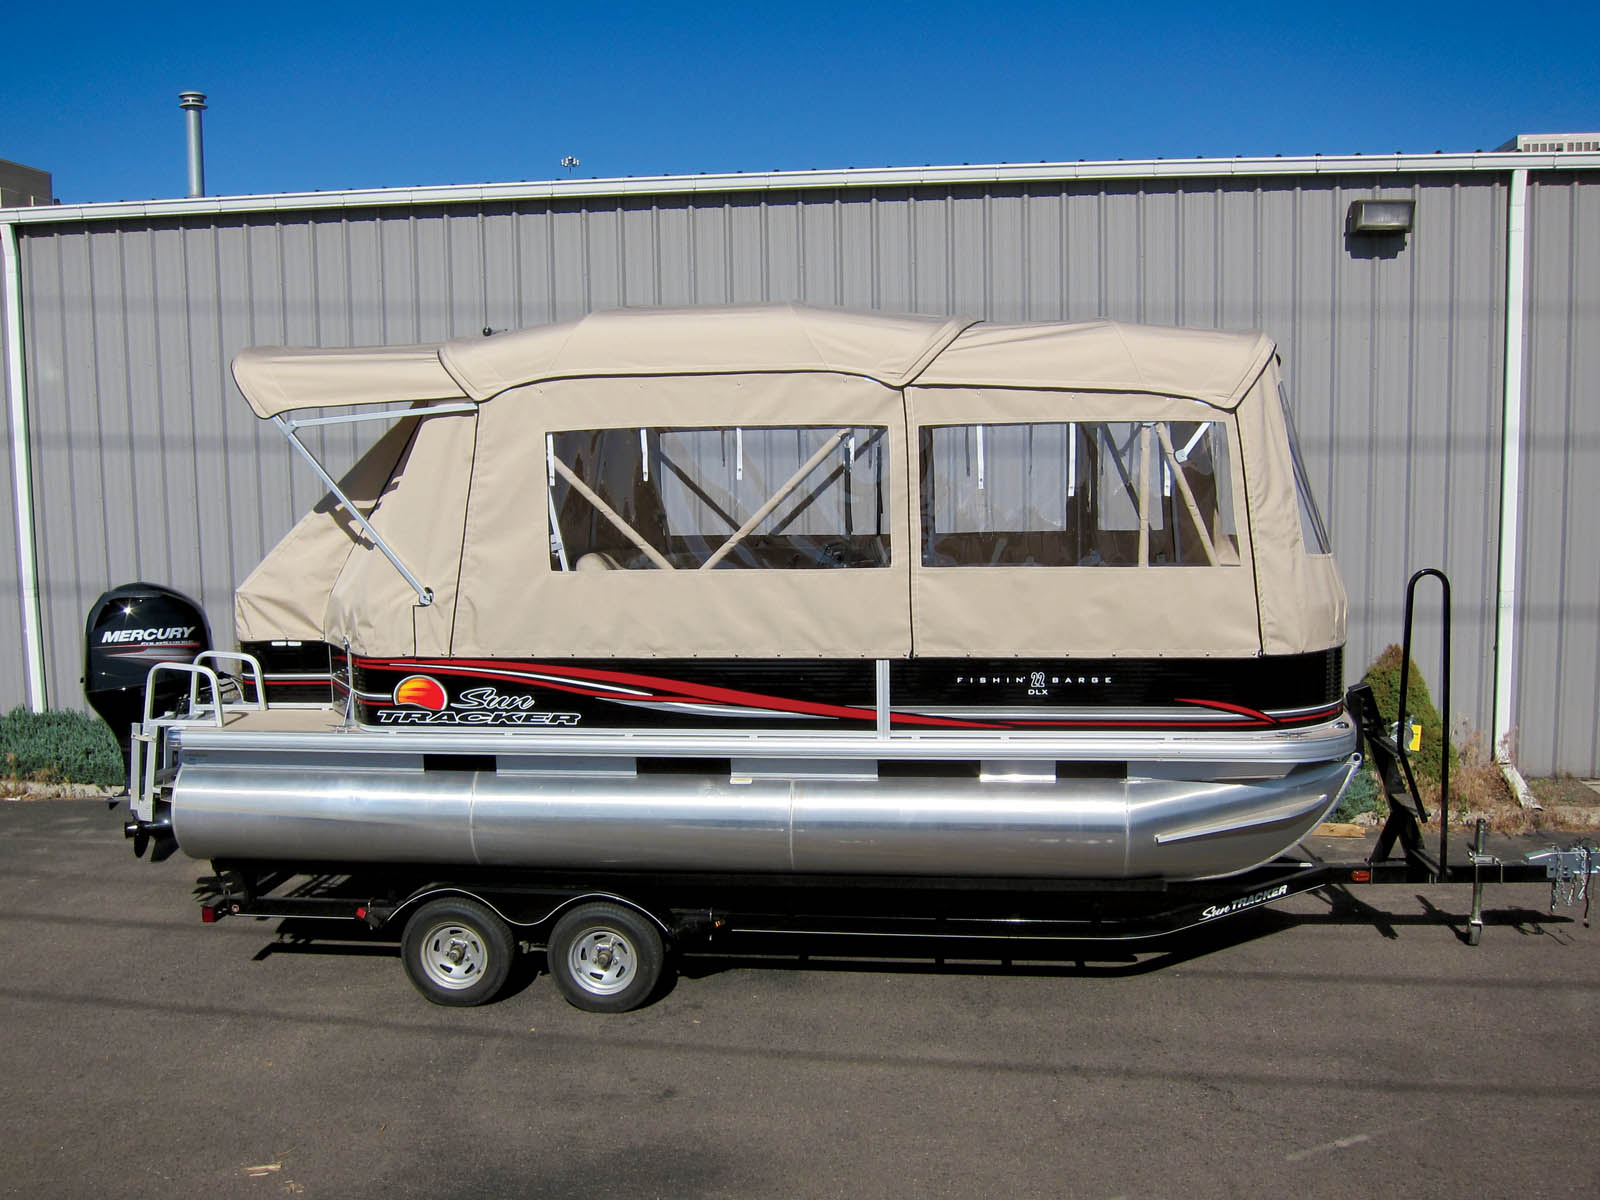 Pontoon Enclosures So who's ready for a longer boating season?